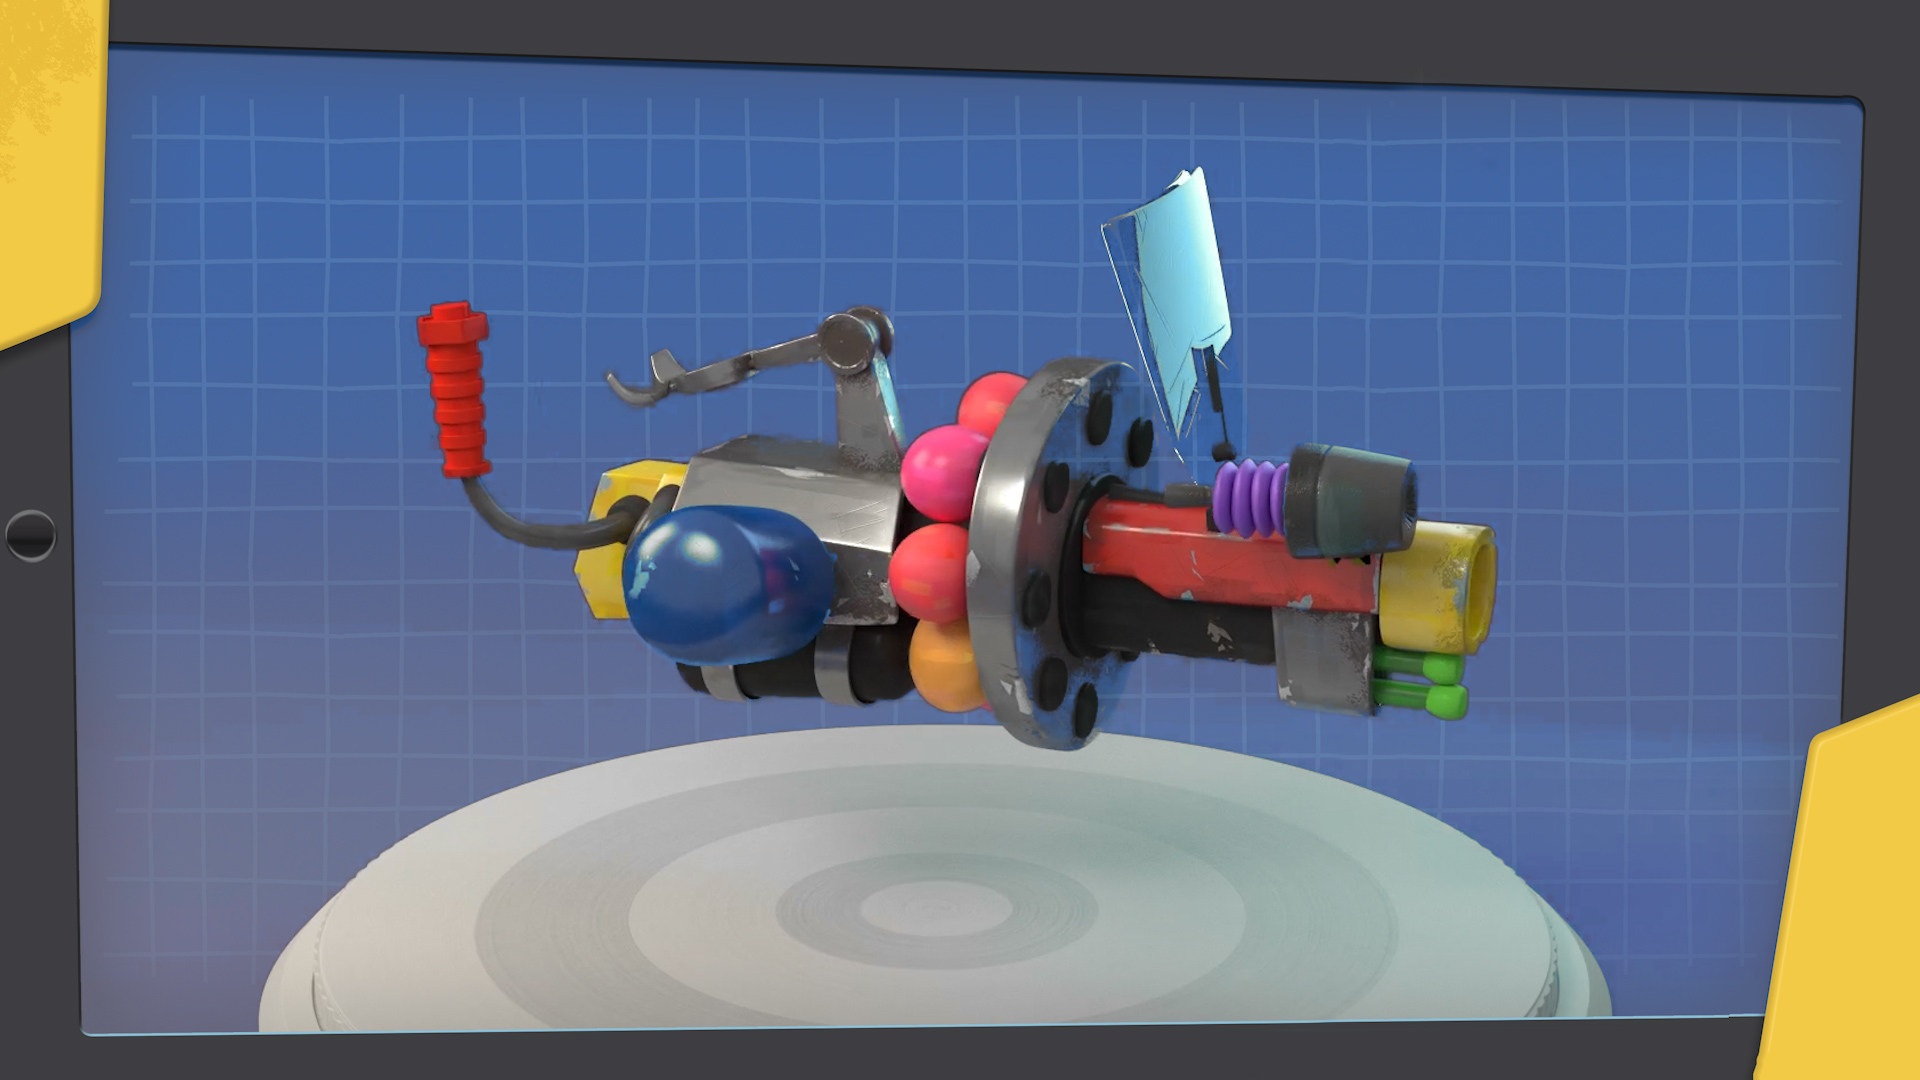 The gang's launcher